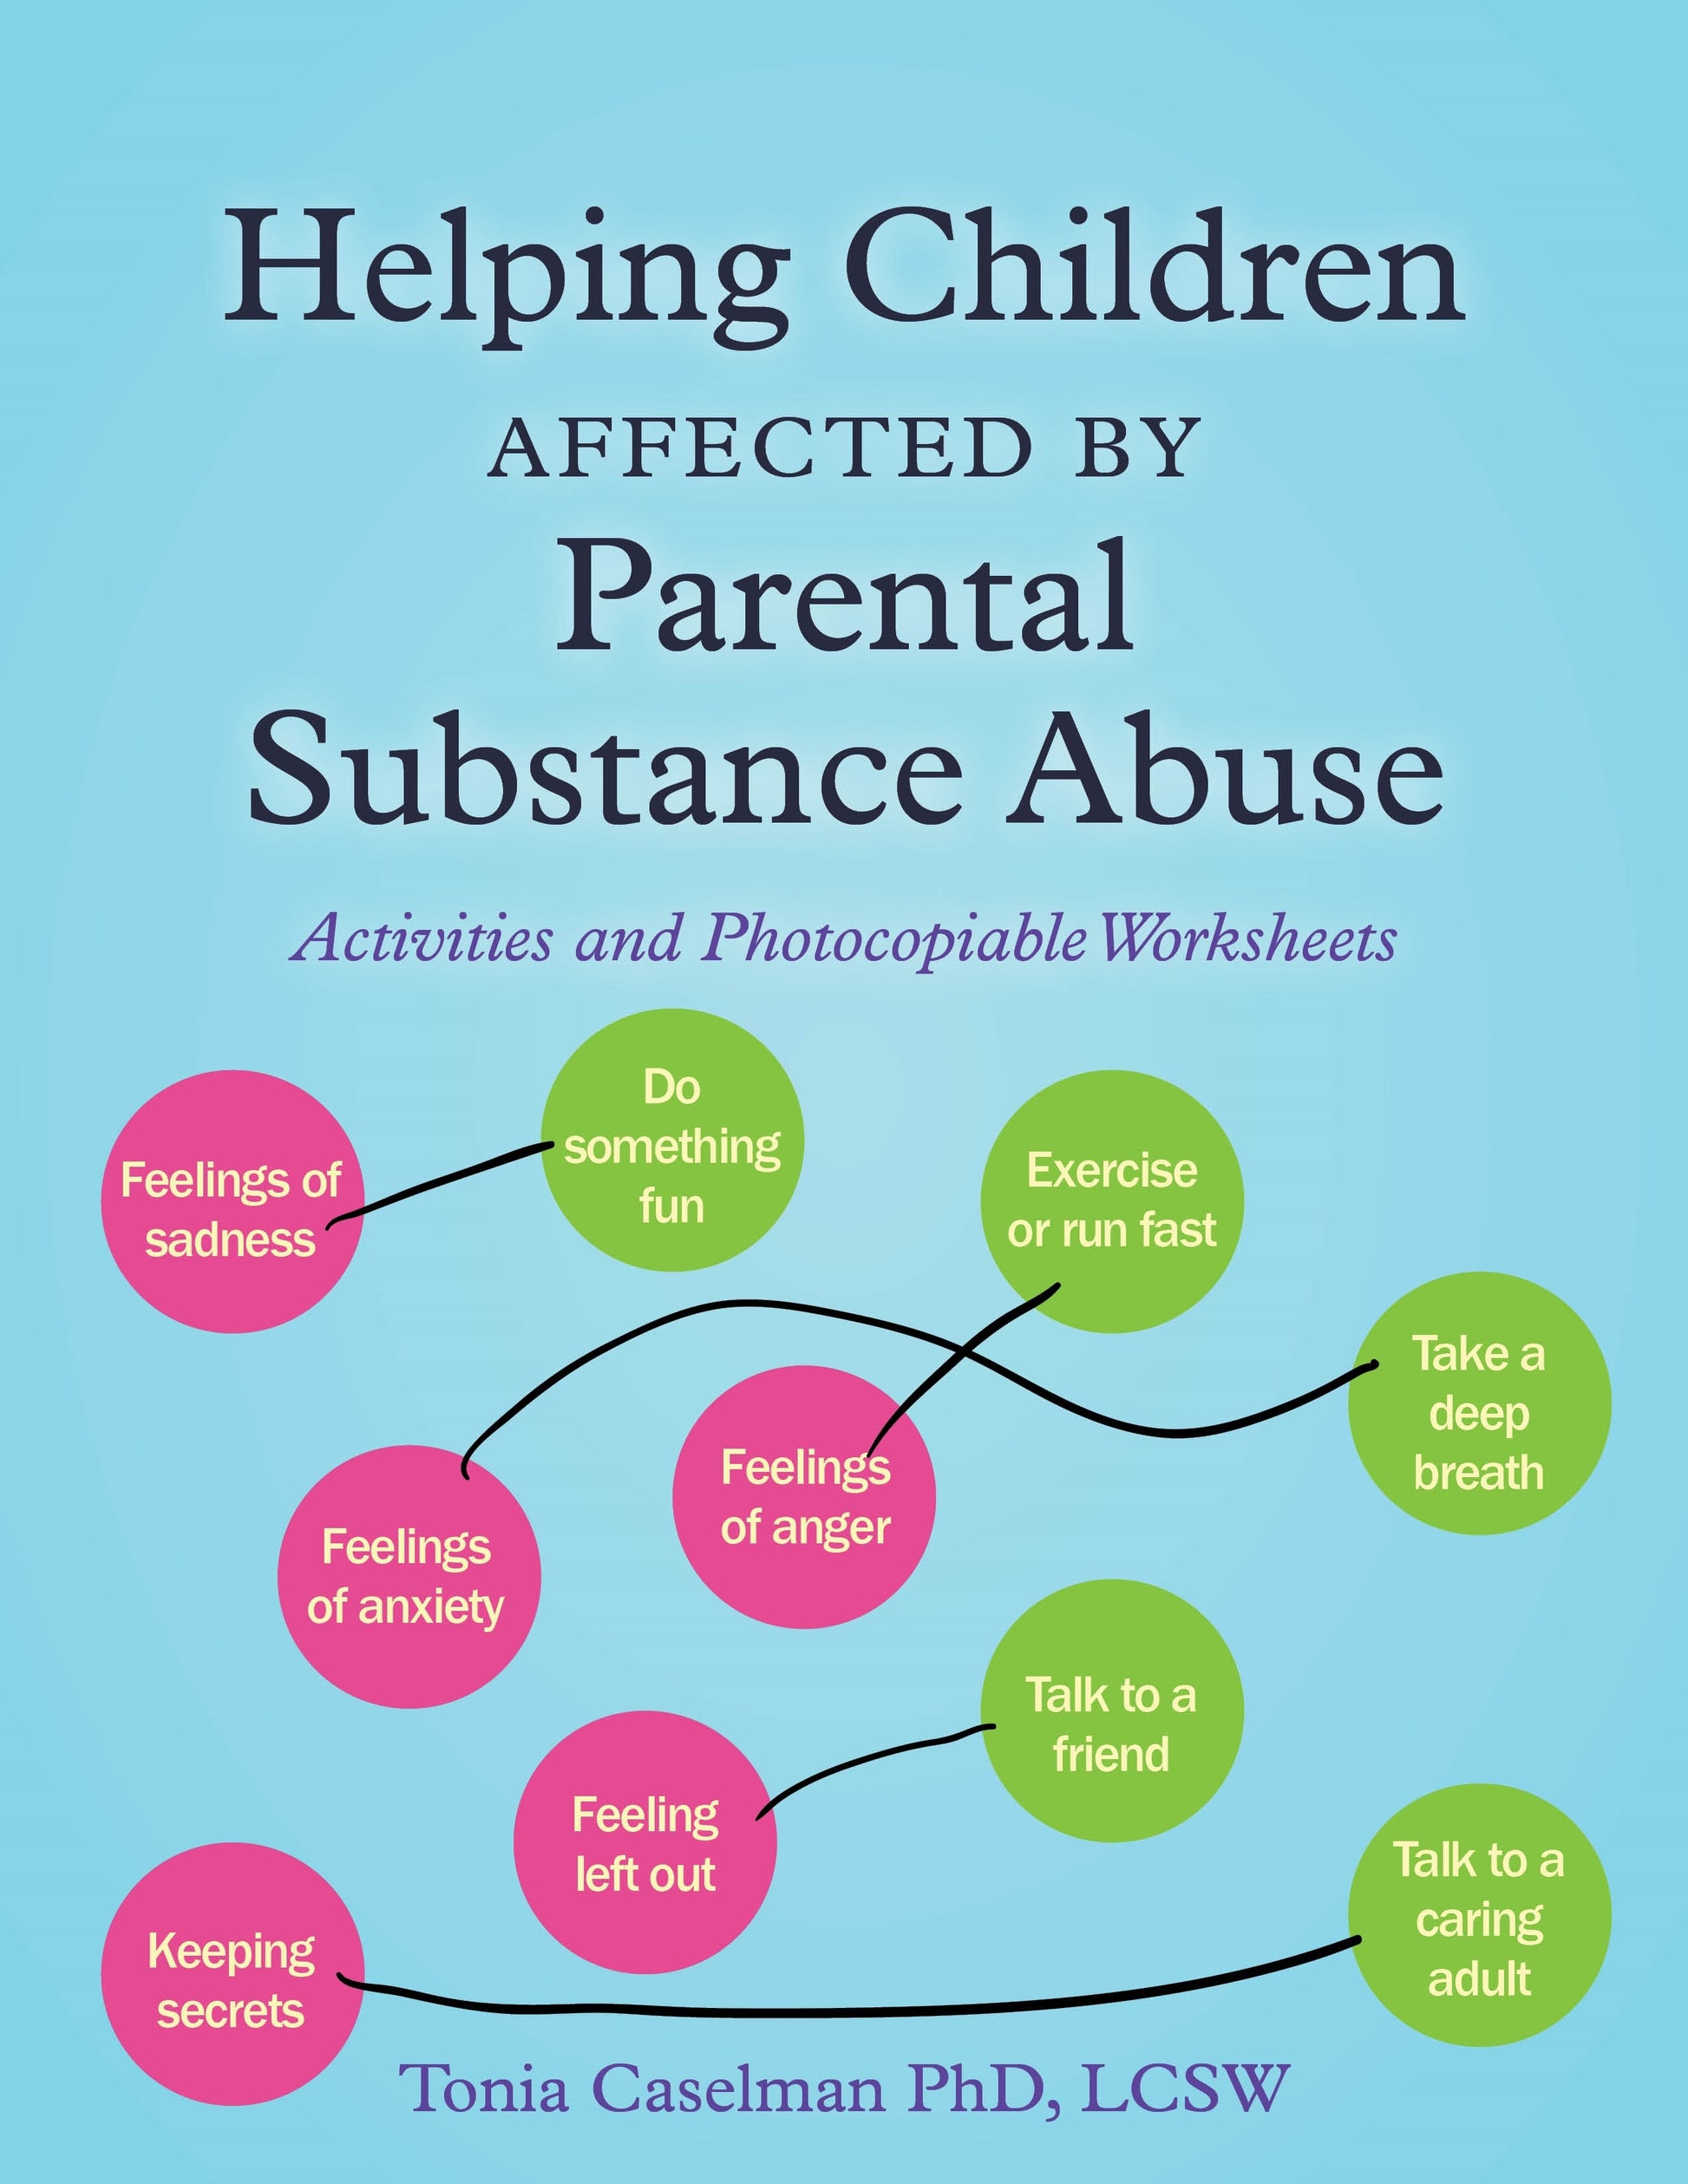 Helping Children Affected by Parental Substance Abuse by Tonia Caselman